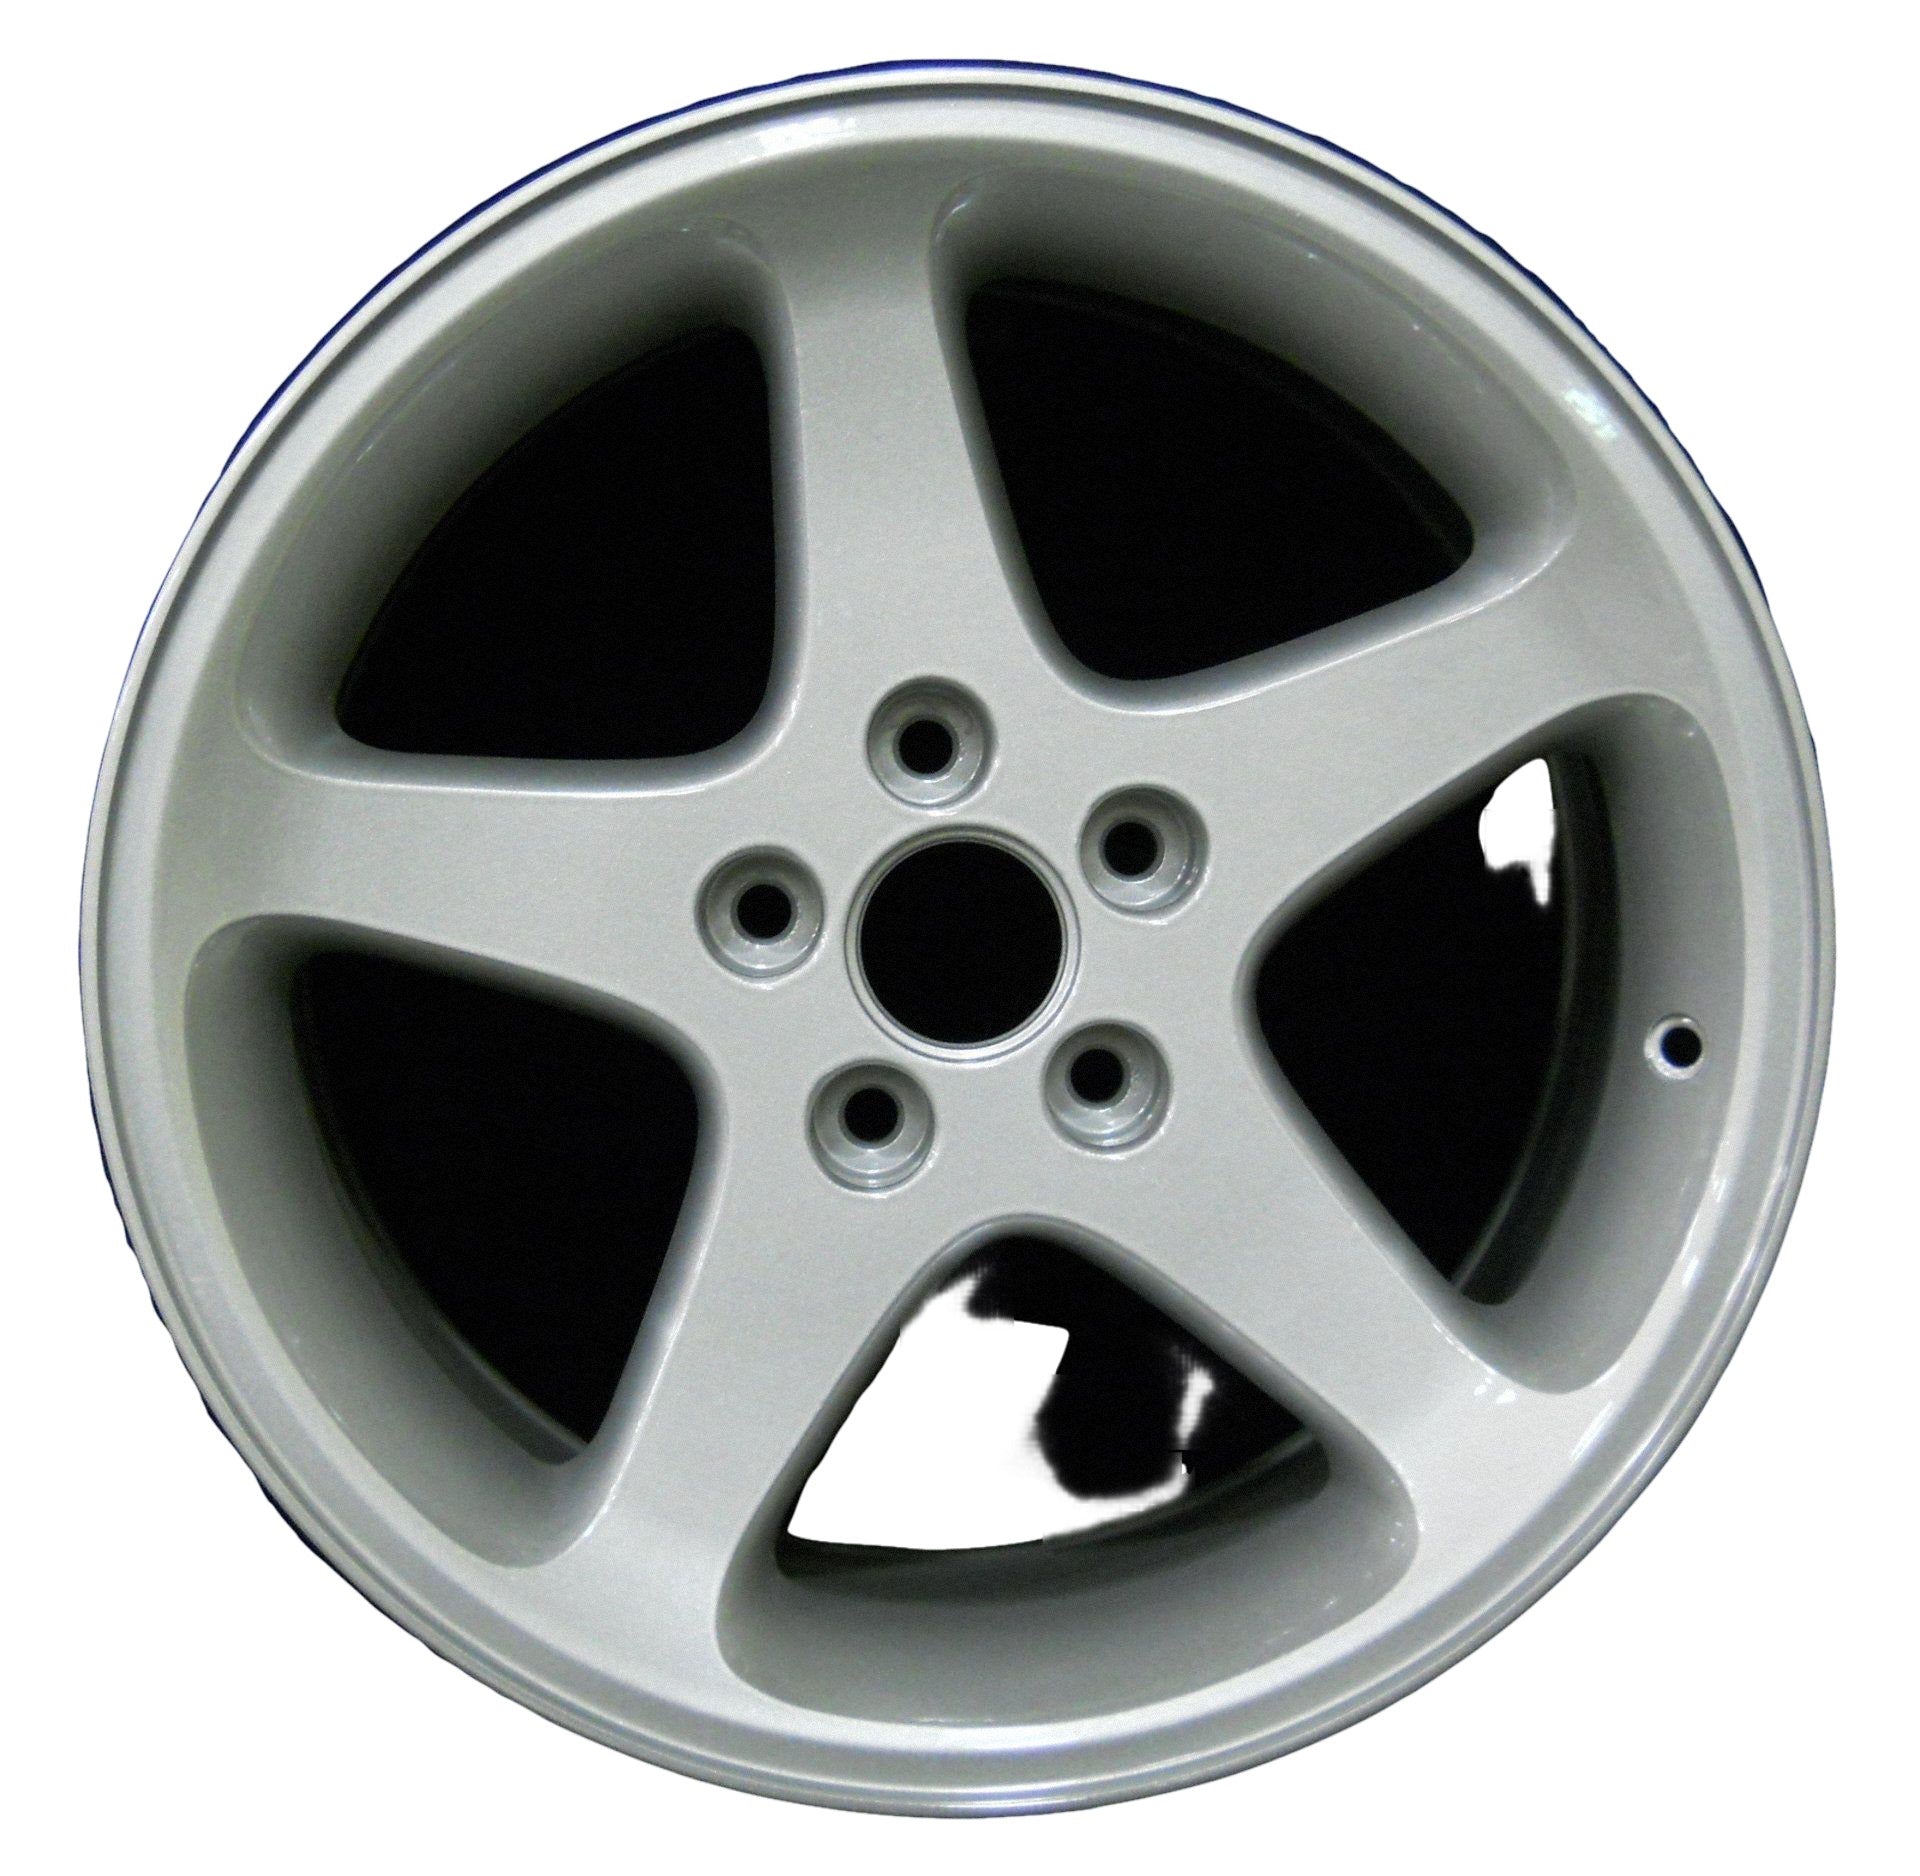 Ford Mustang  1999, 2000, 2001 Factory OEM Car Wheel Size 17x8 Alloy WAO.3306.PS02.FF